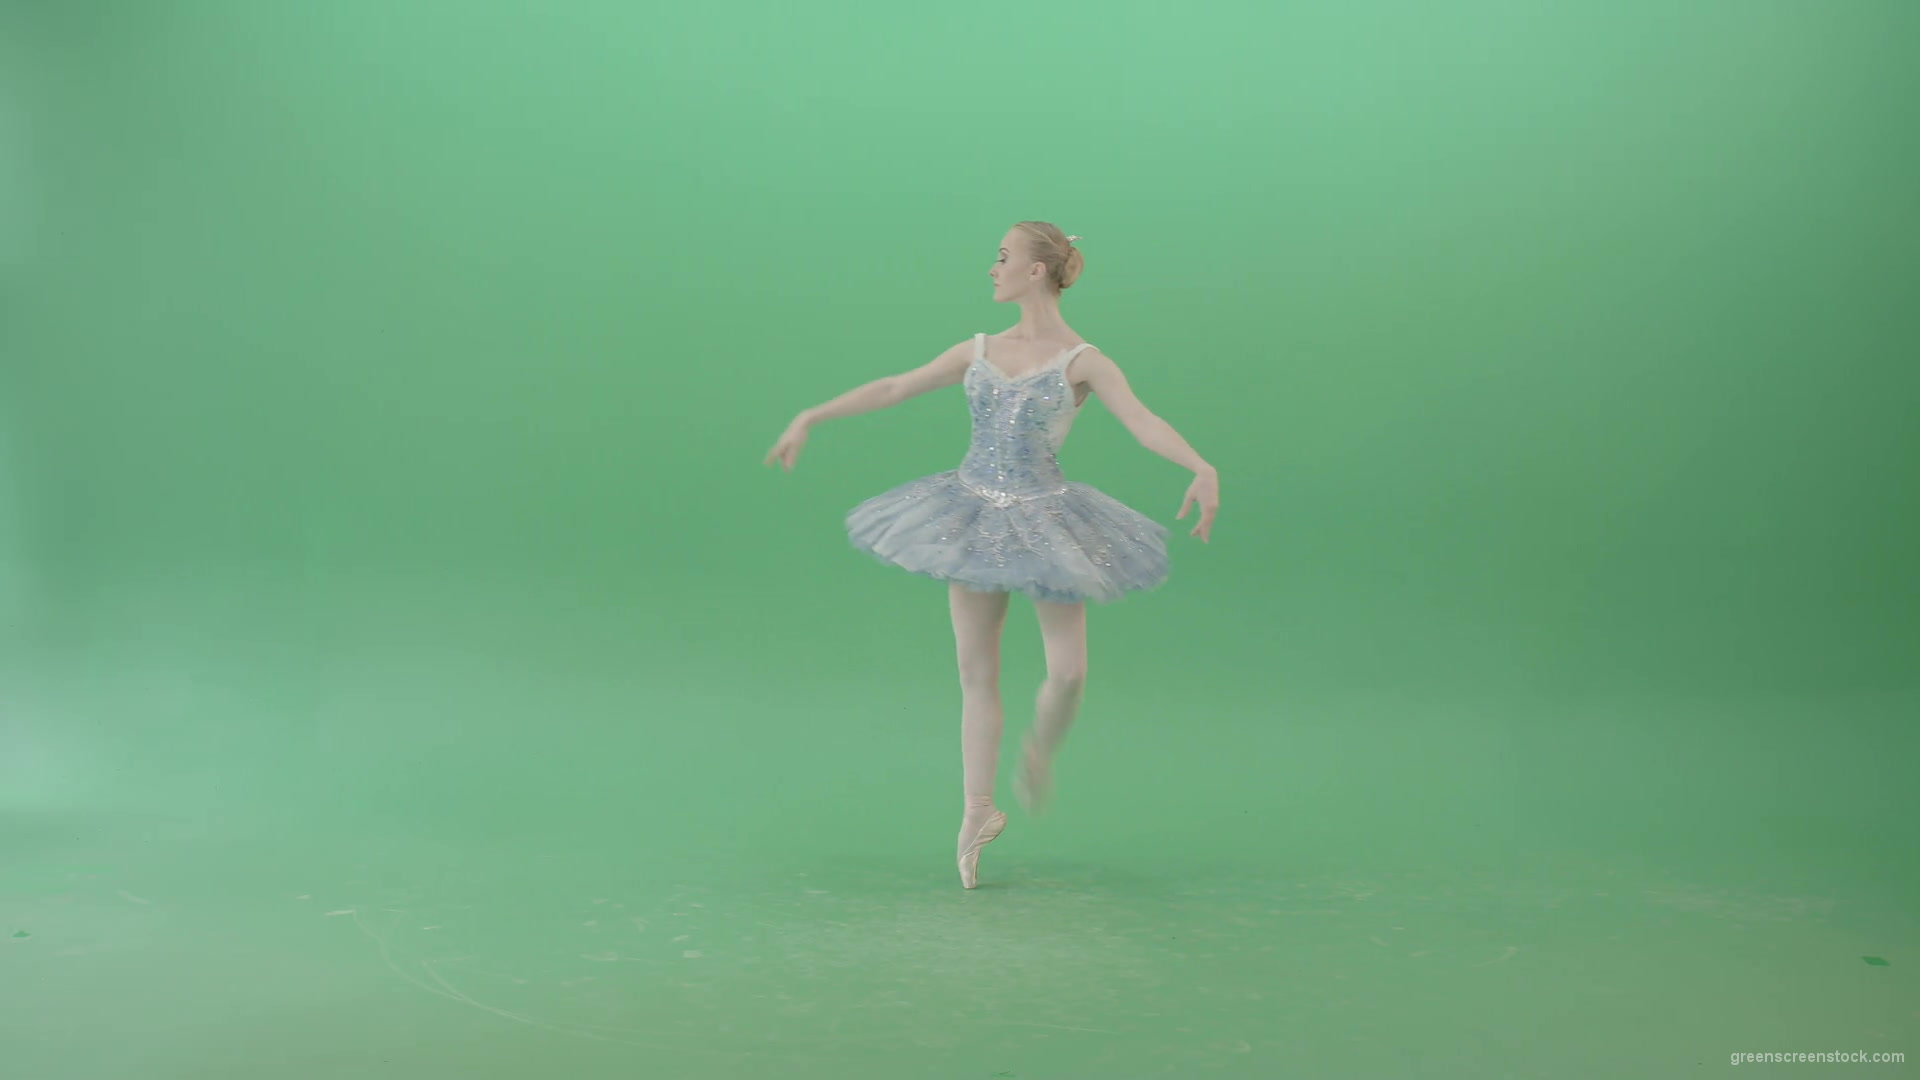 Christmas-story-baller-dancing-girl-in-blue-ballerin-dress-performing-isolated-on-green-screen-4K-Video-Footage-1920_002 Green Screen Stock